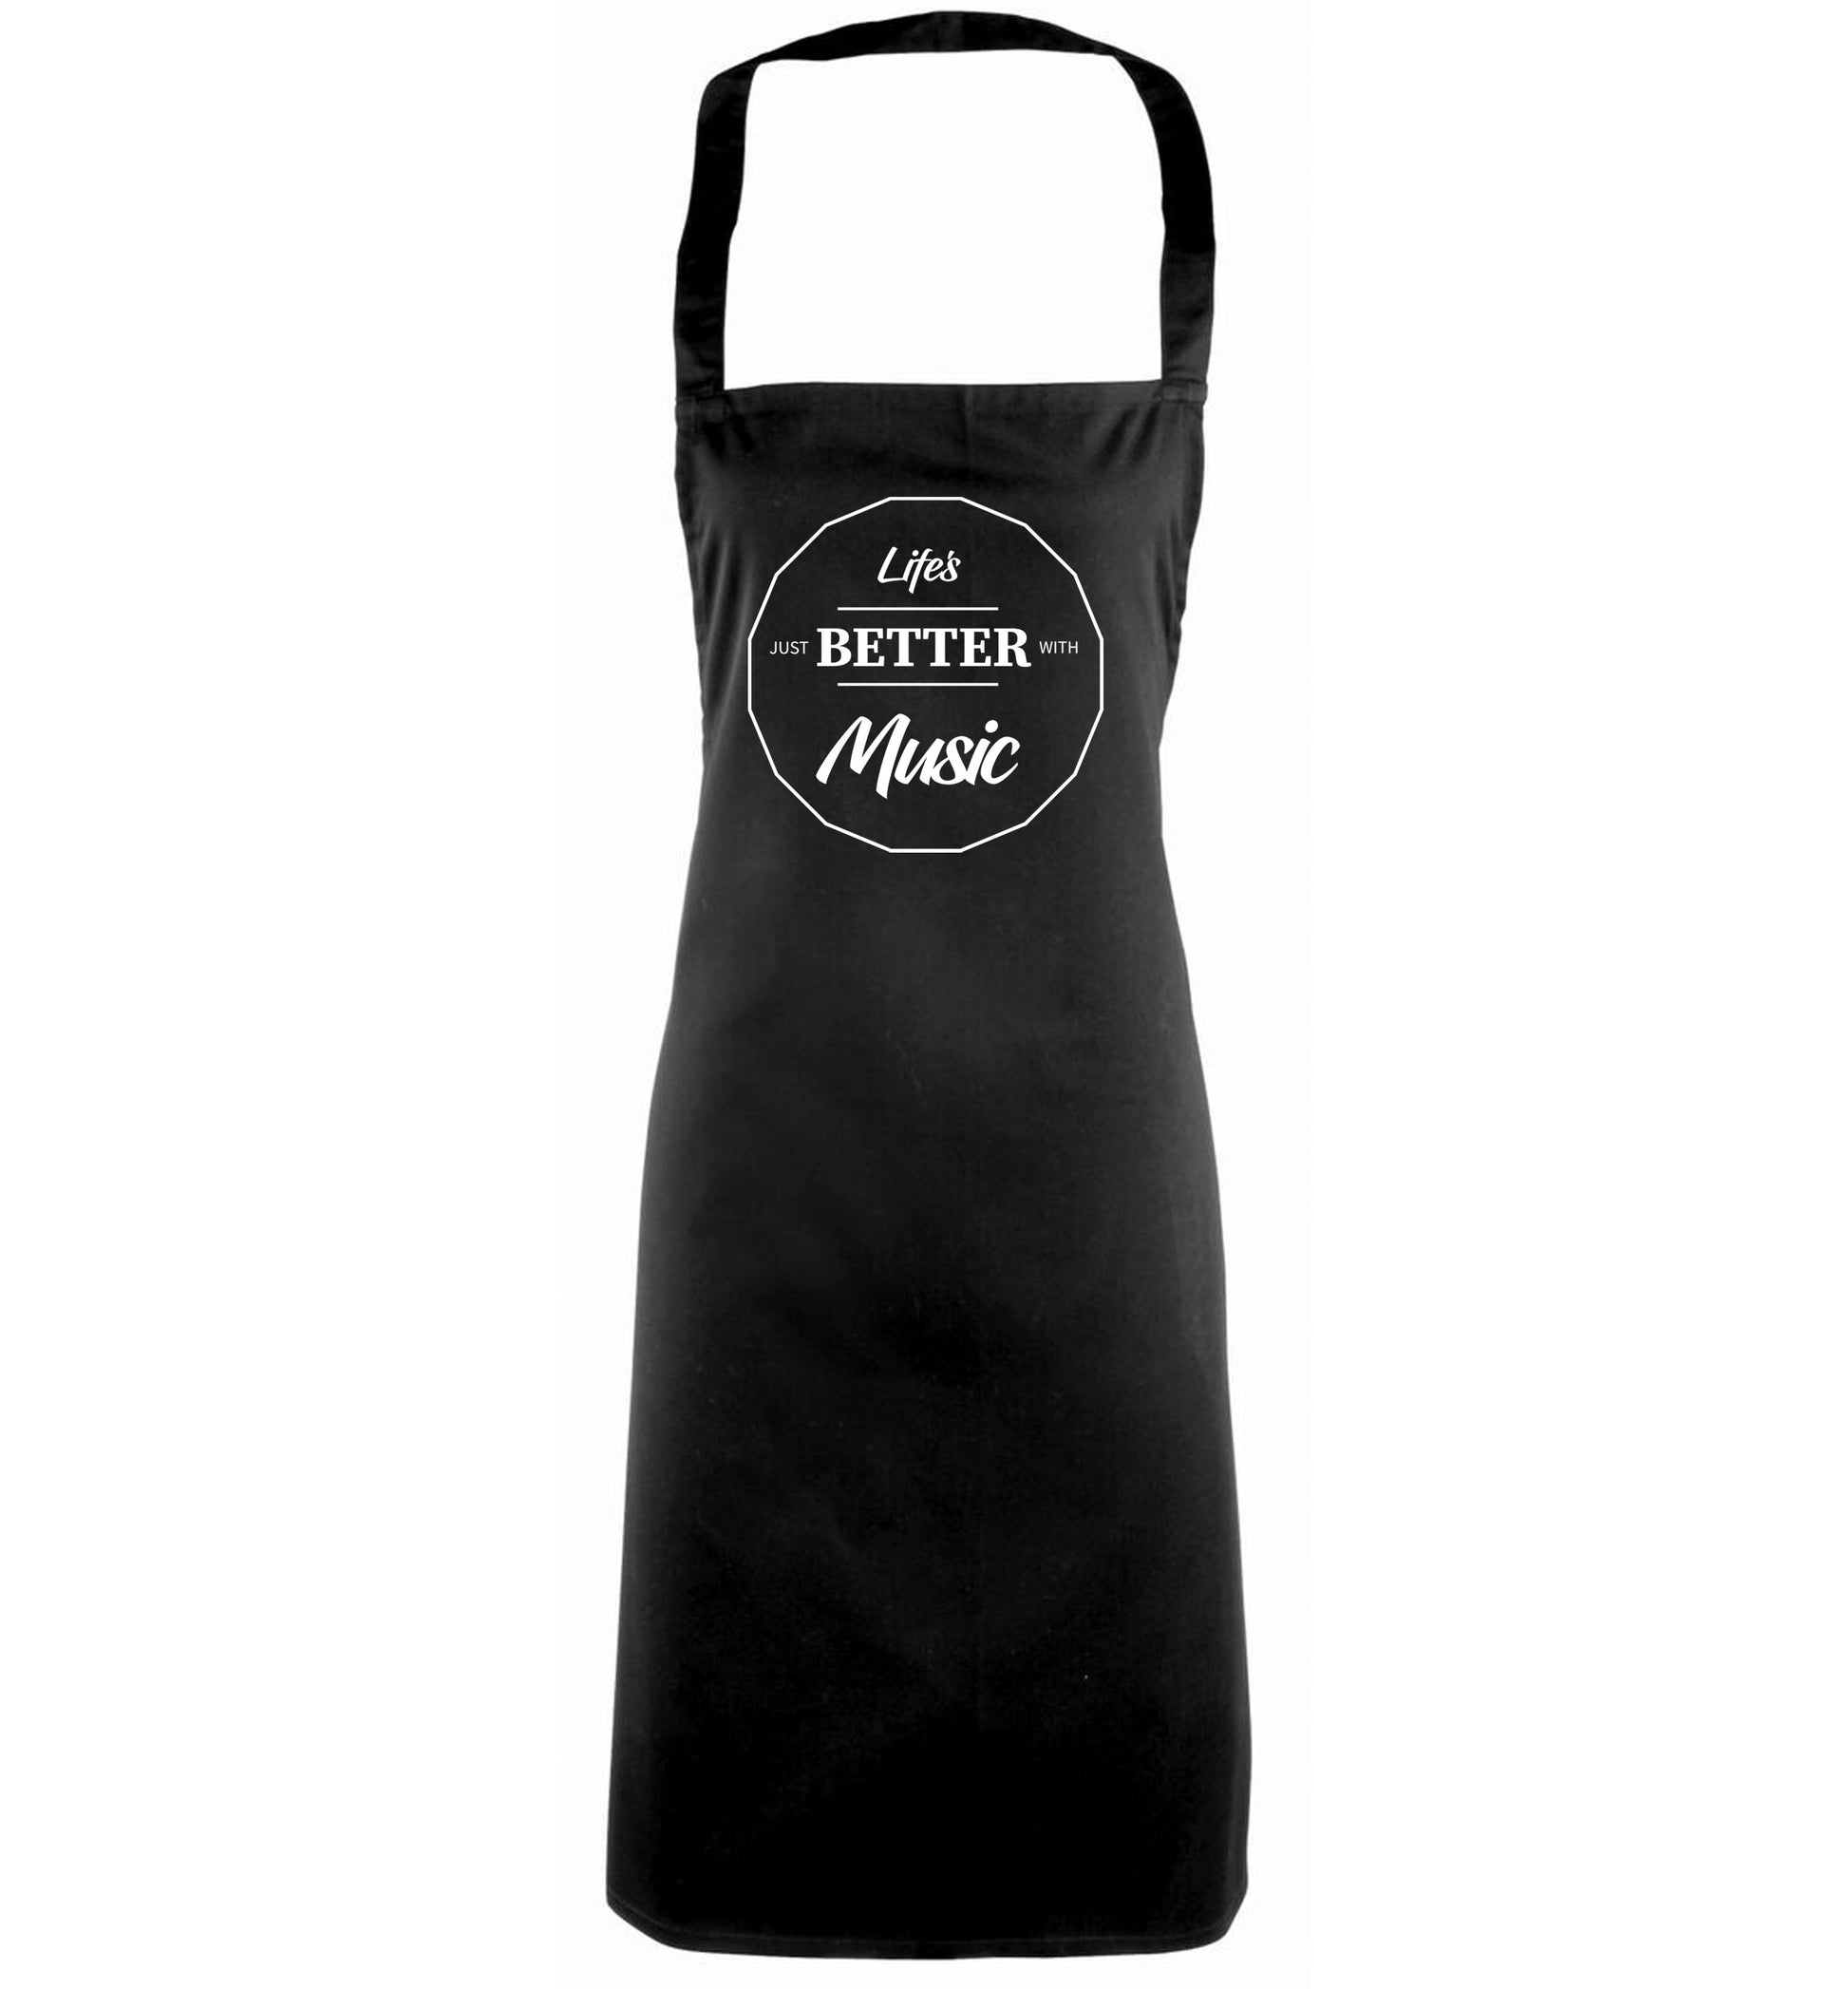 Life is Better With Music black apron